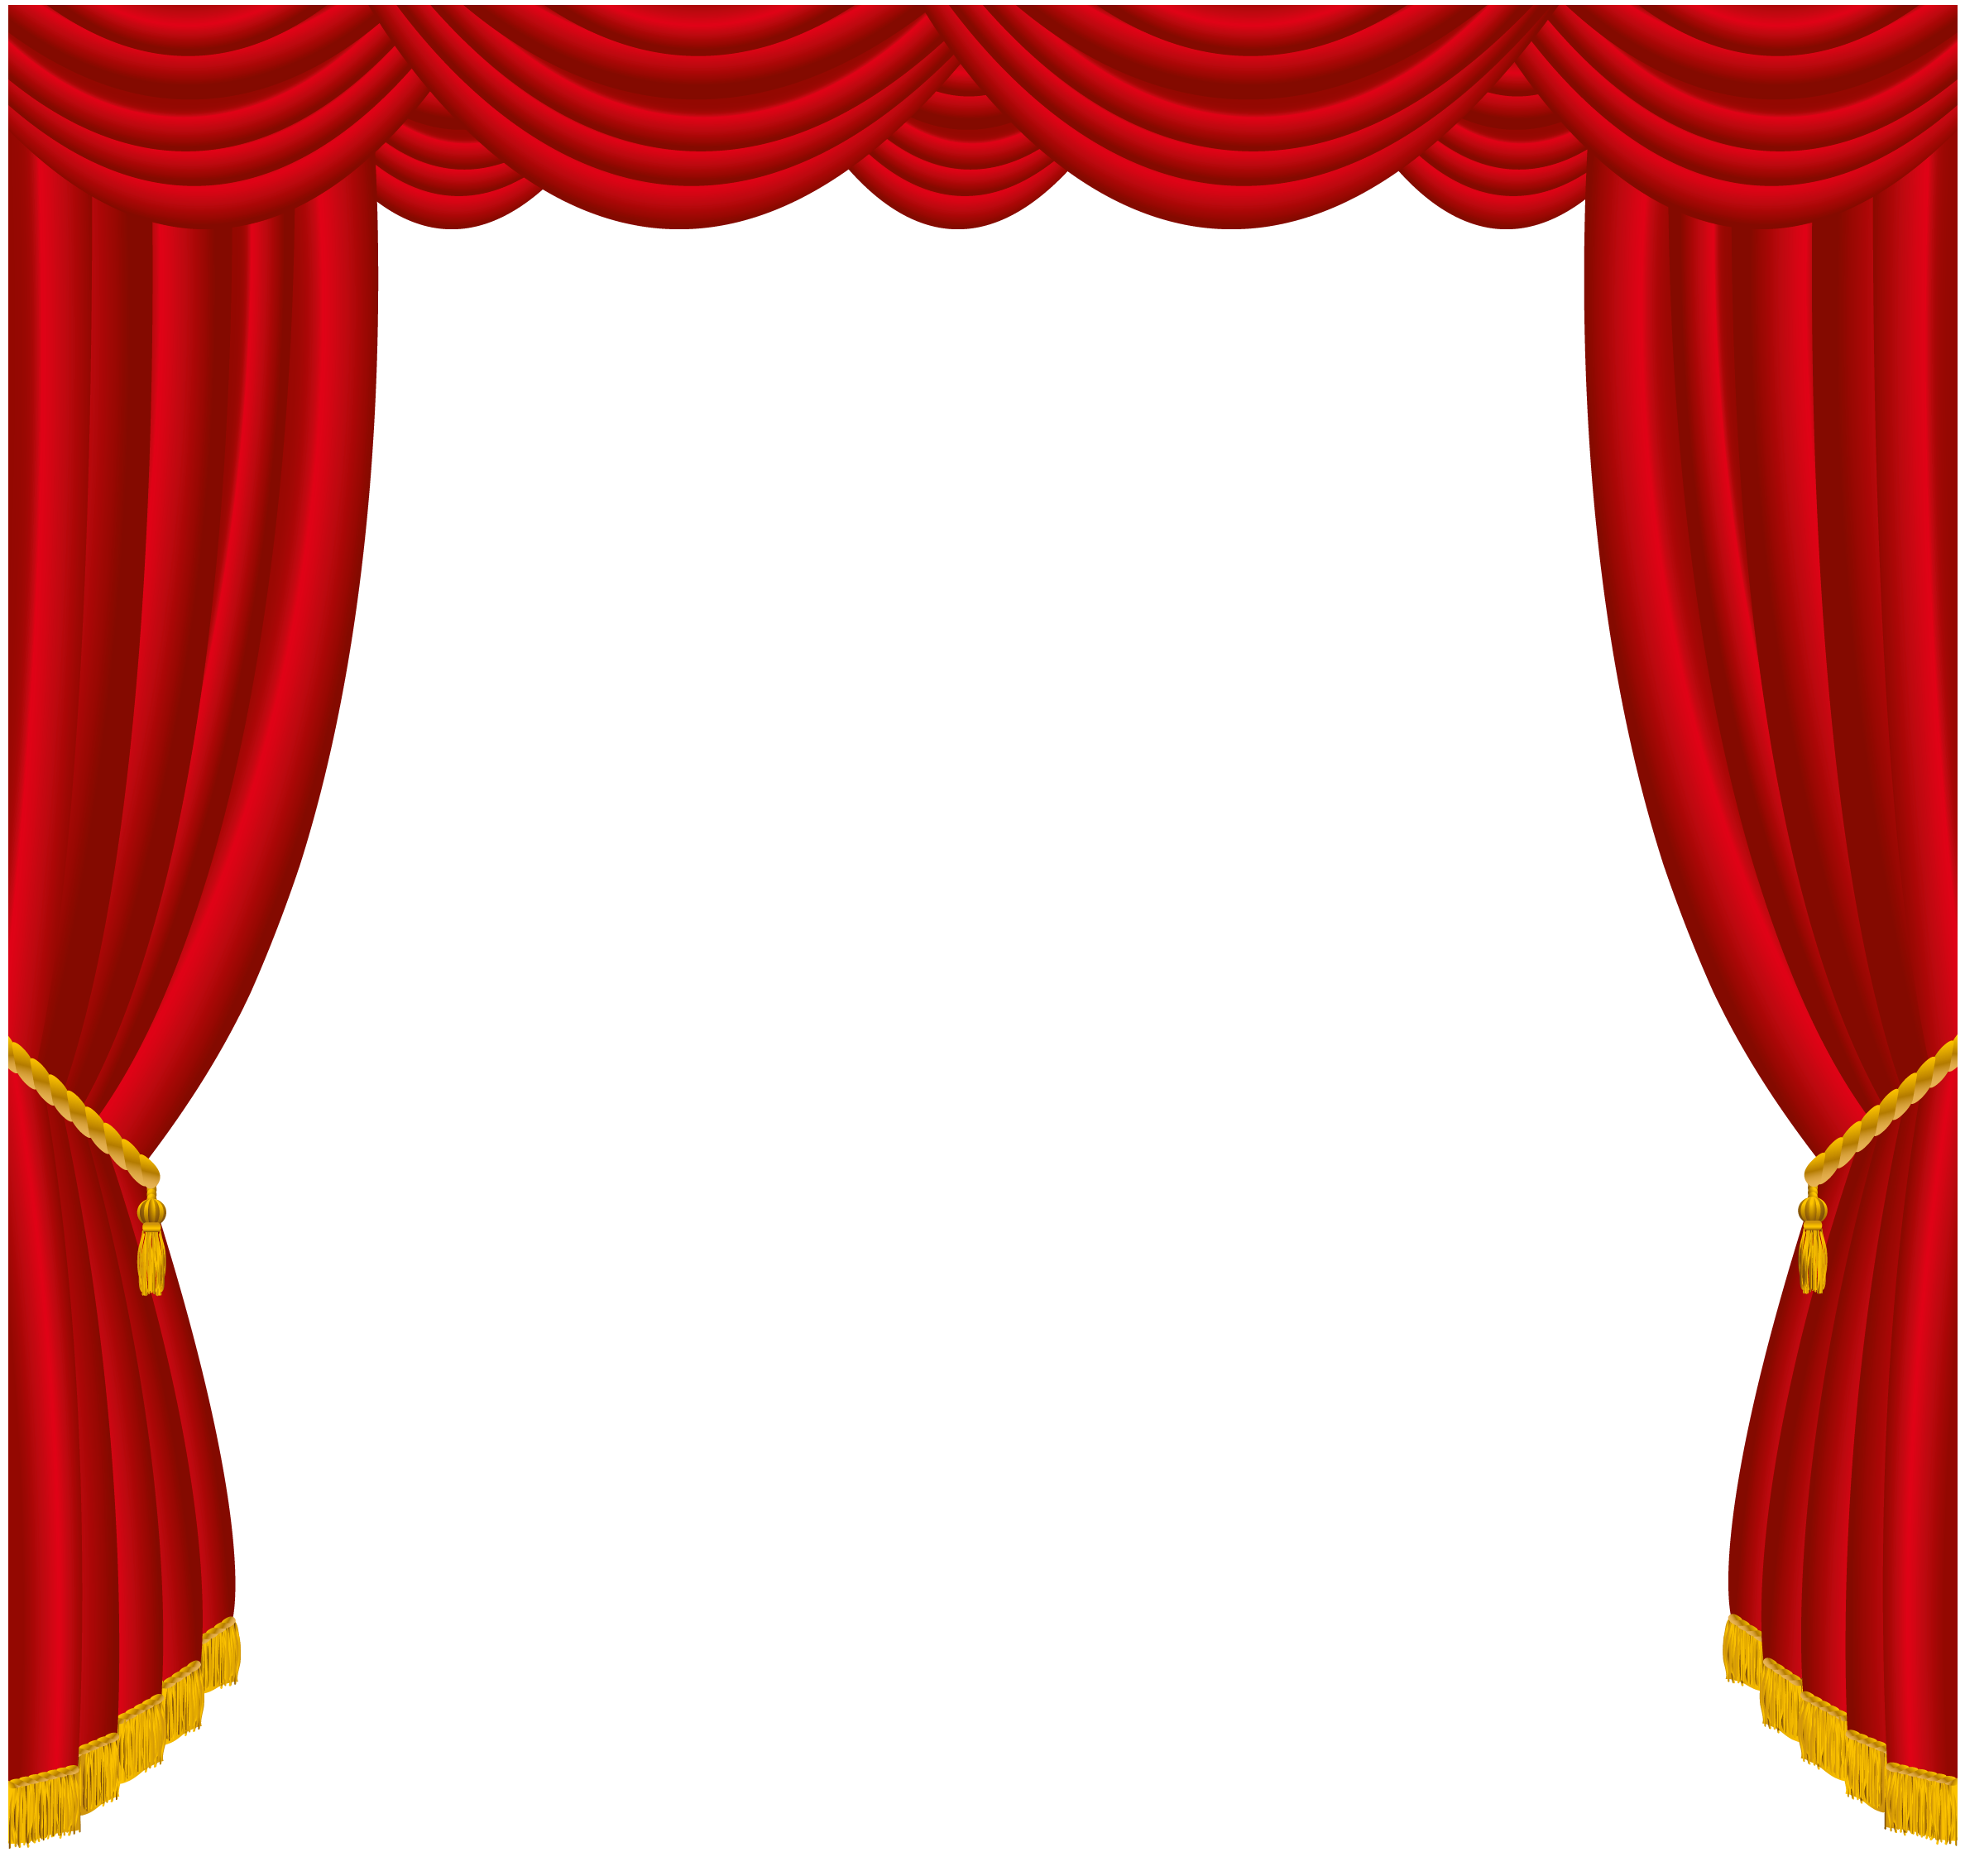 Curtains clipart - Clipground